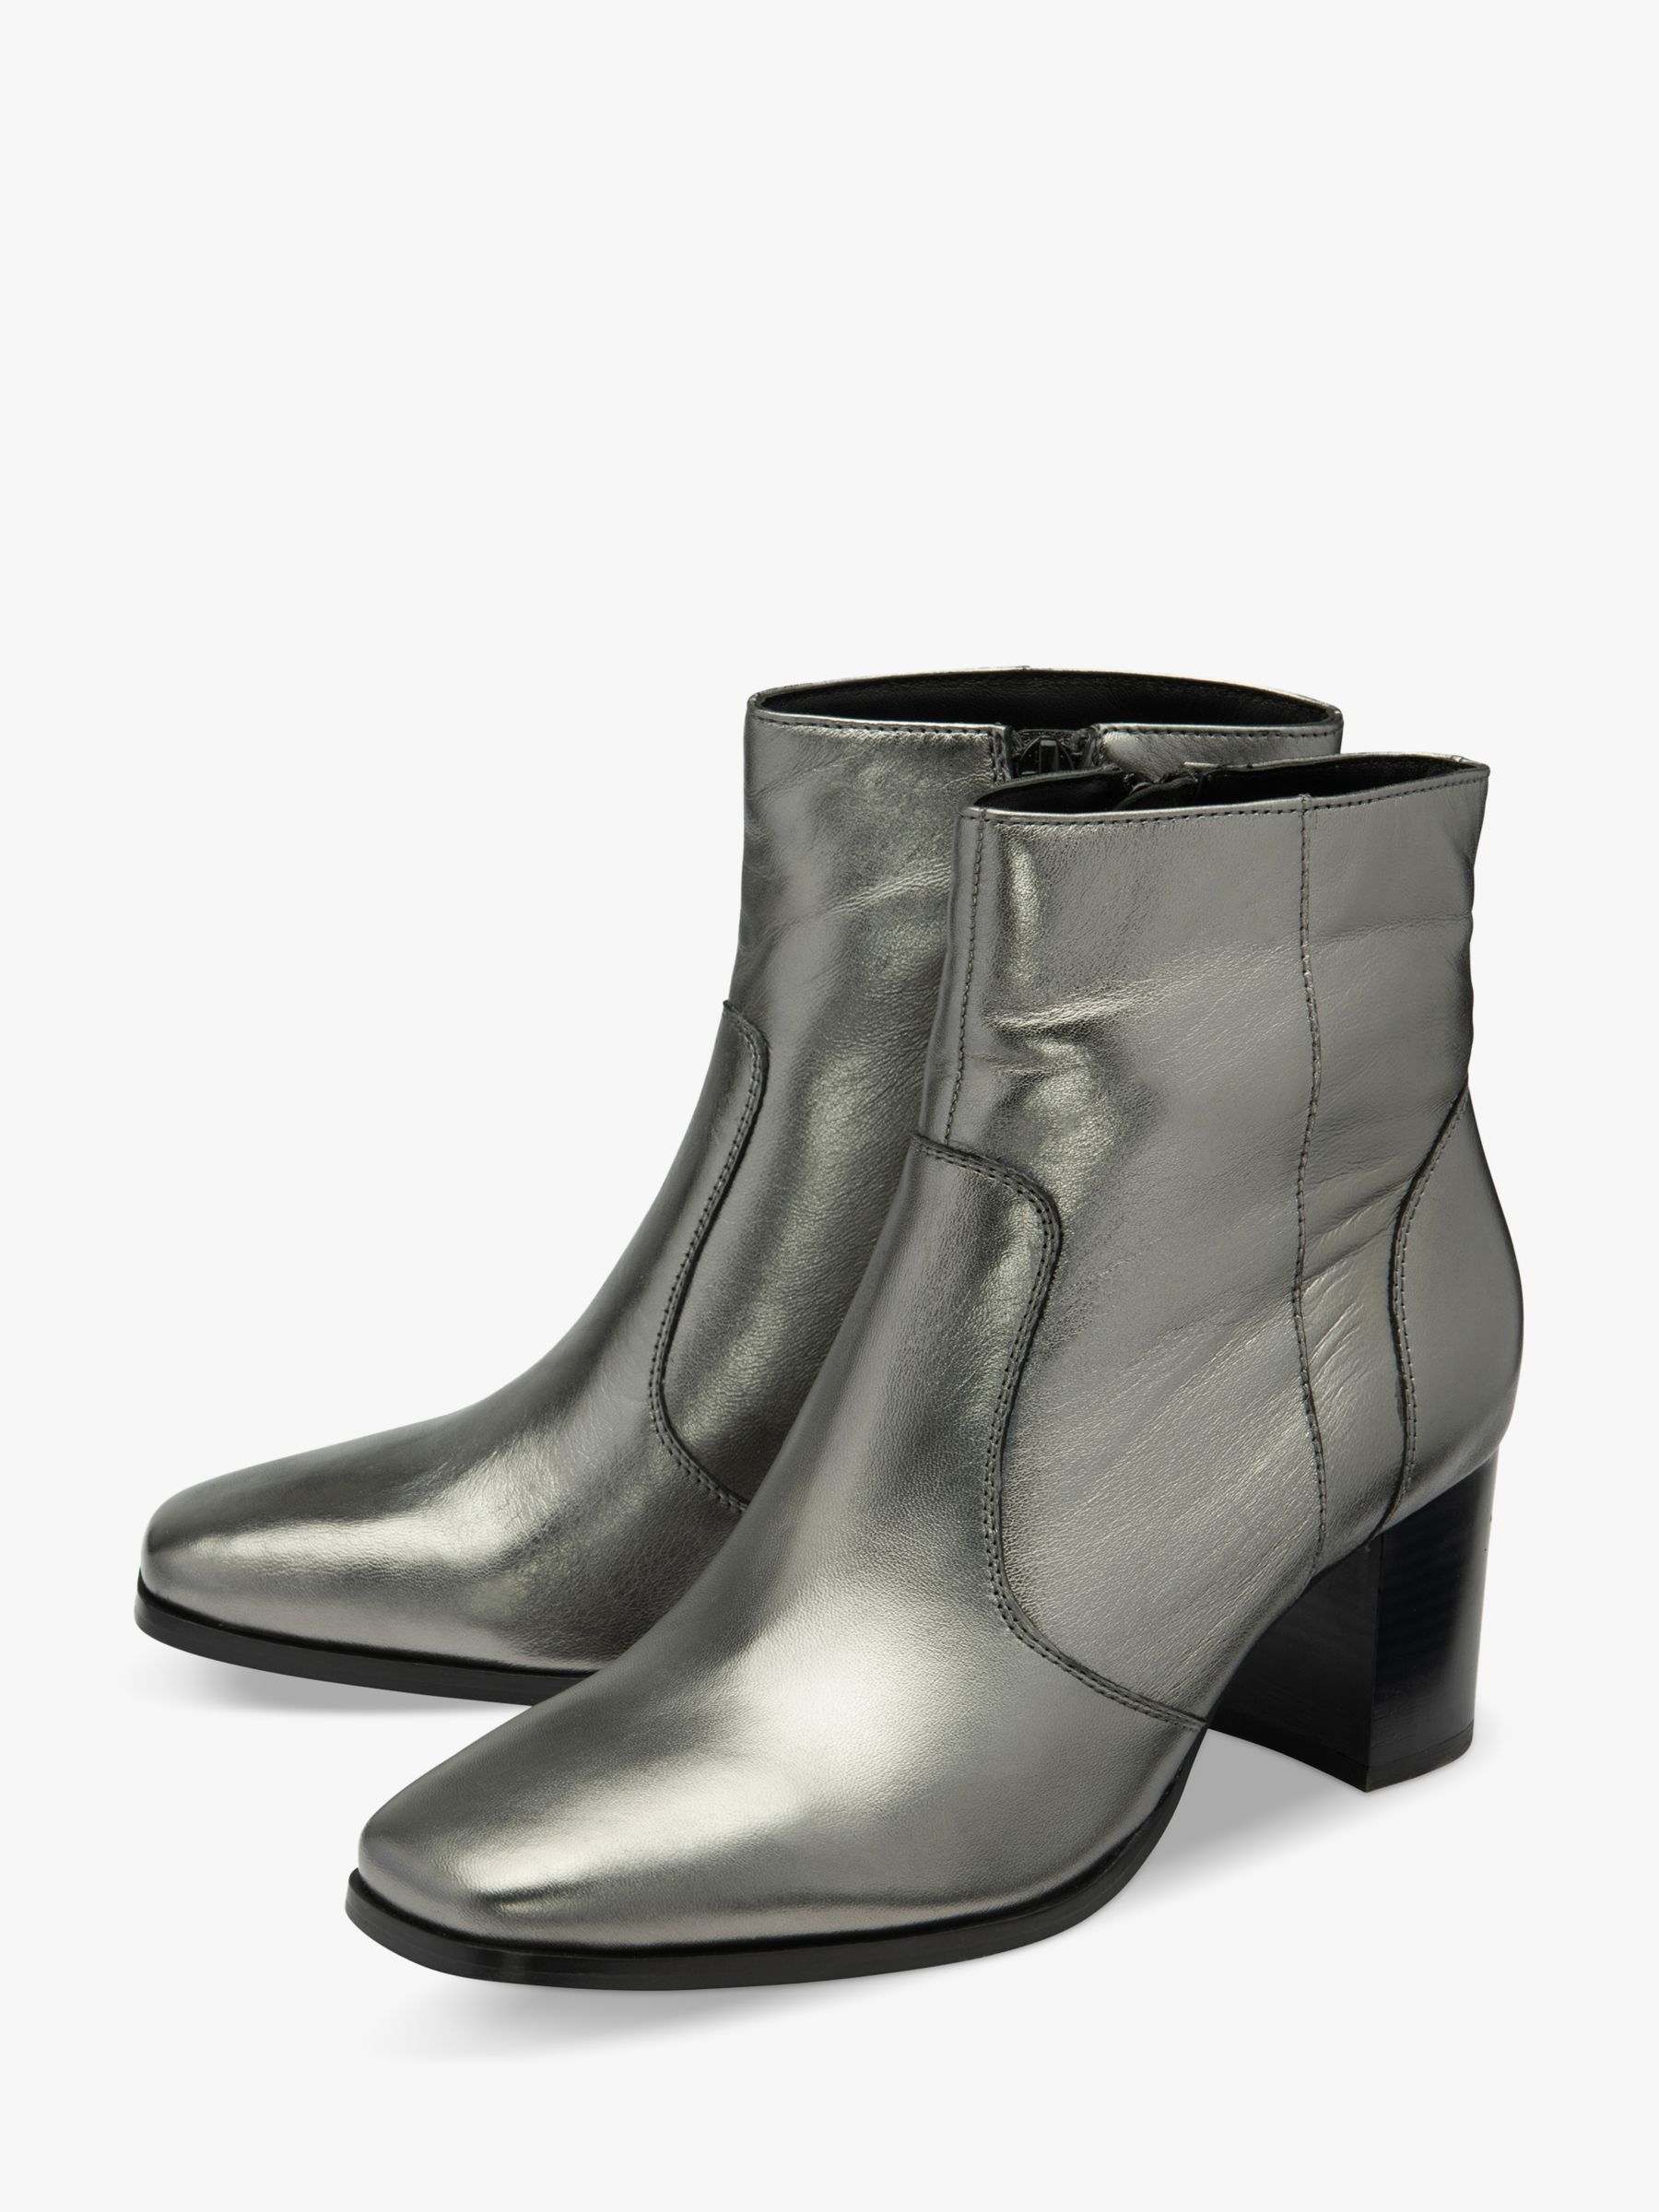 Ravel Louth Leather Ankle Boots, Pewter, 3